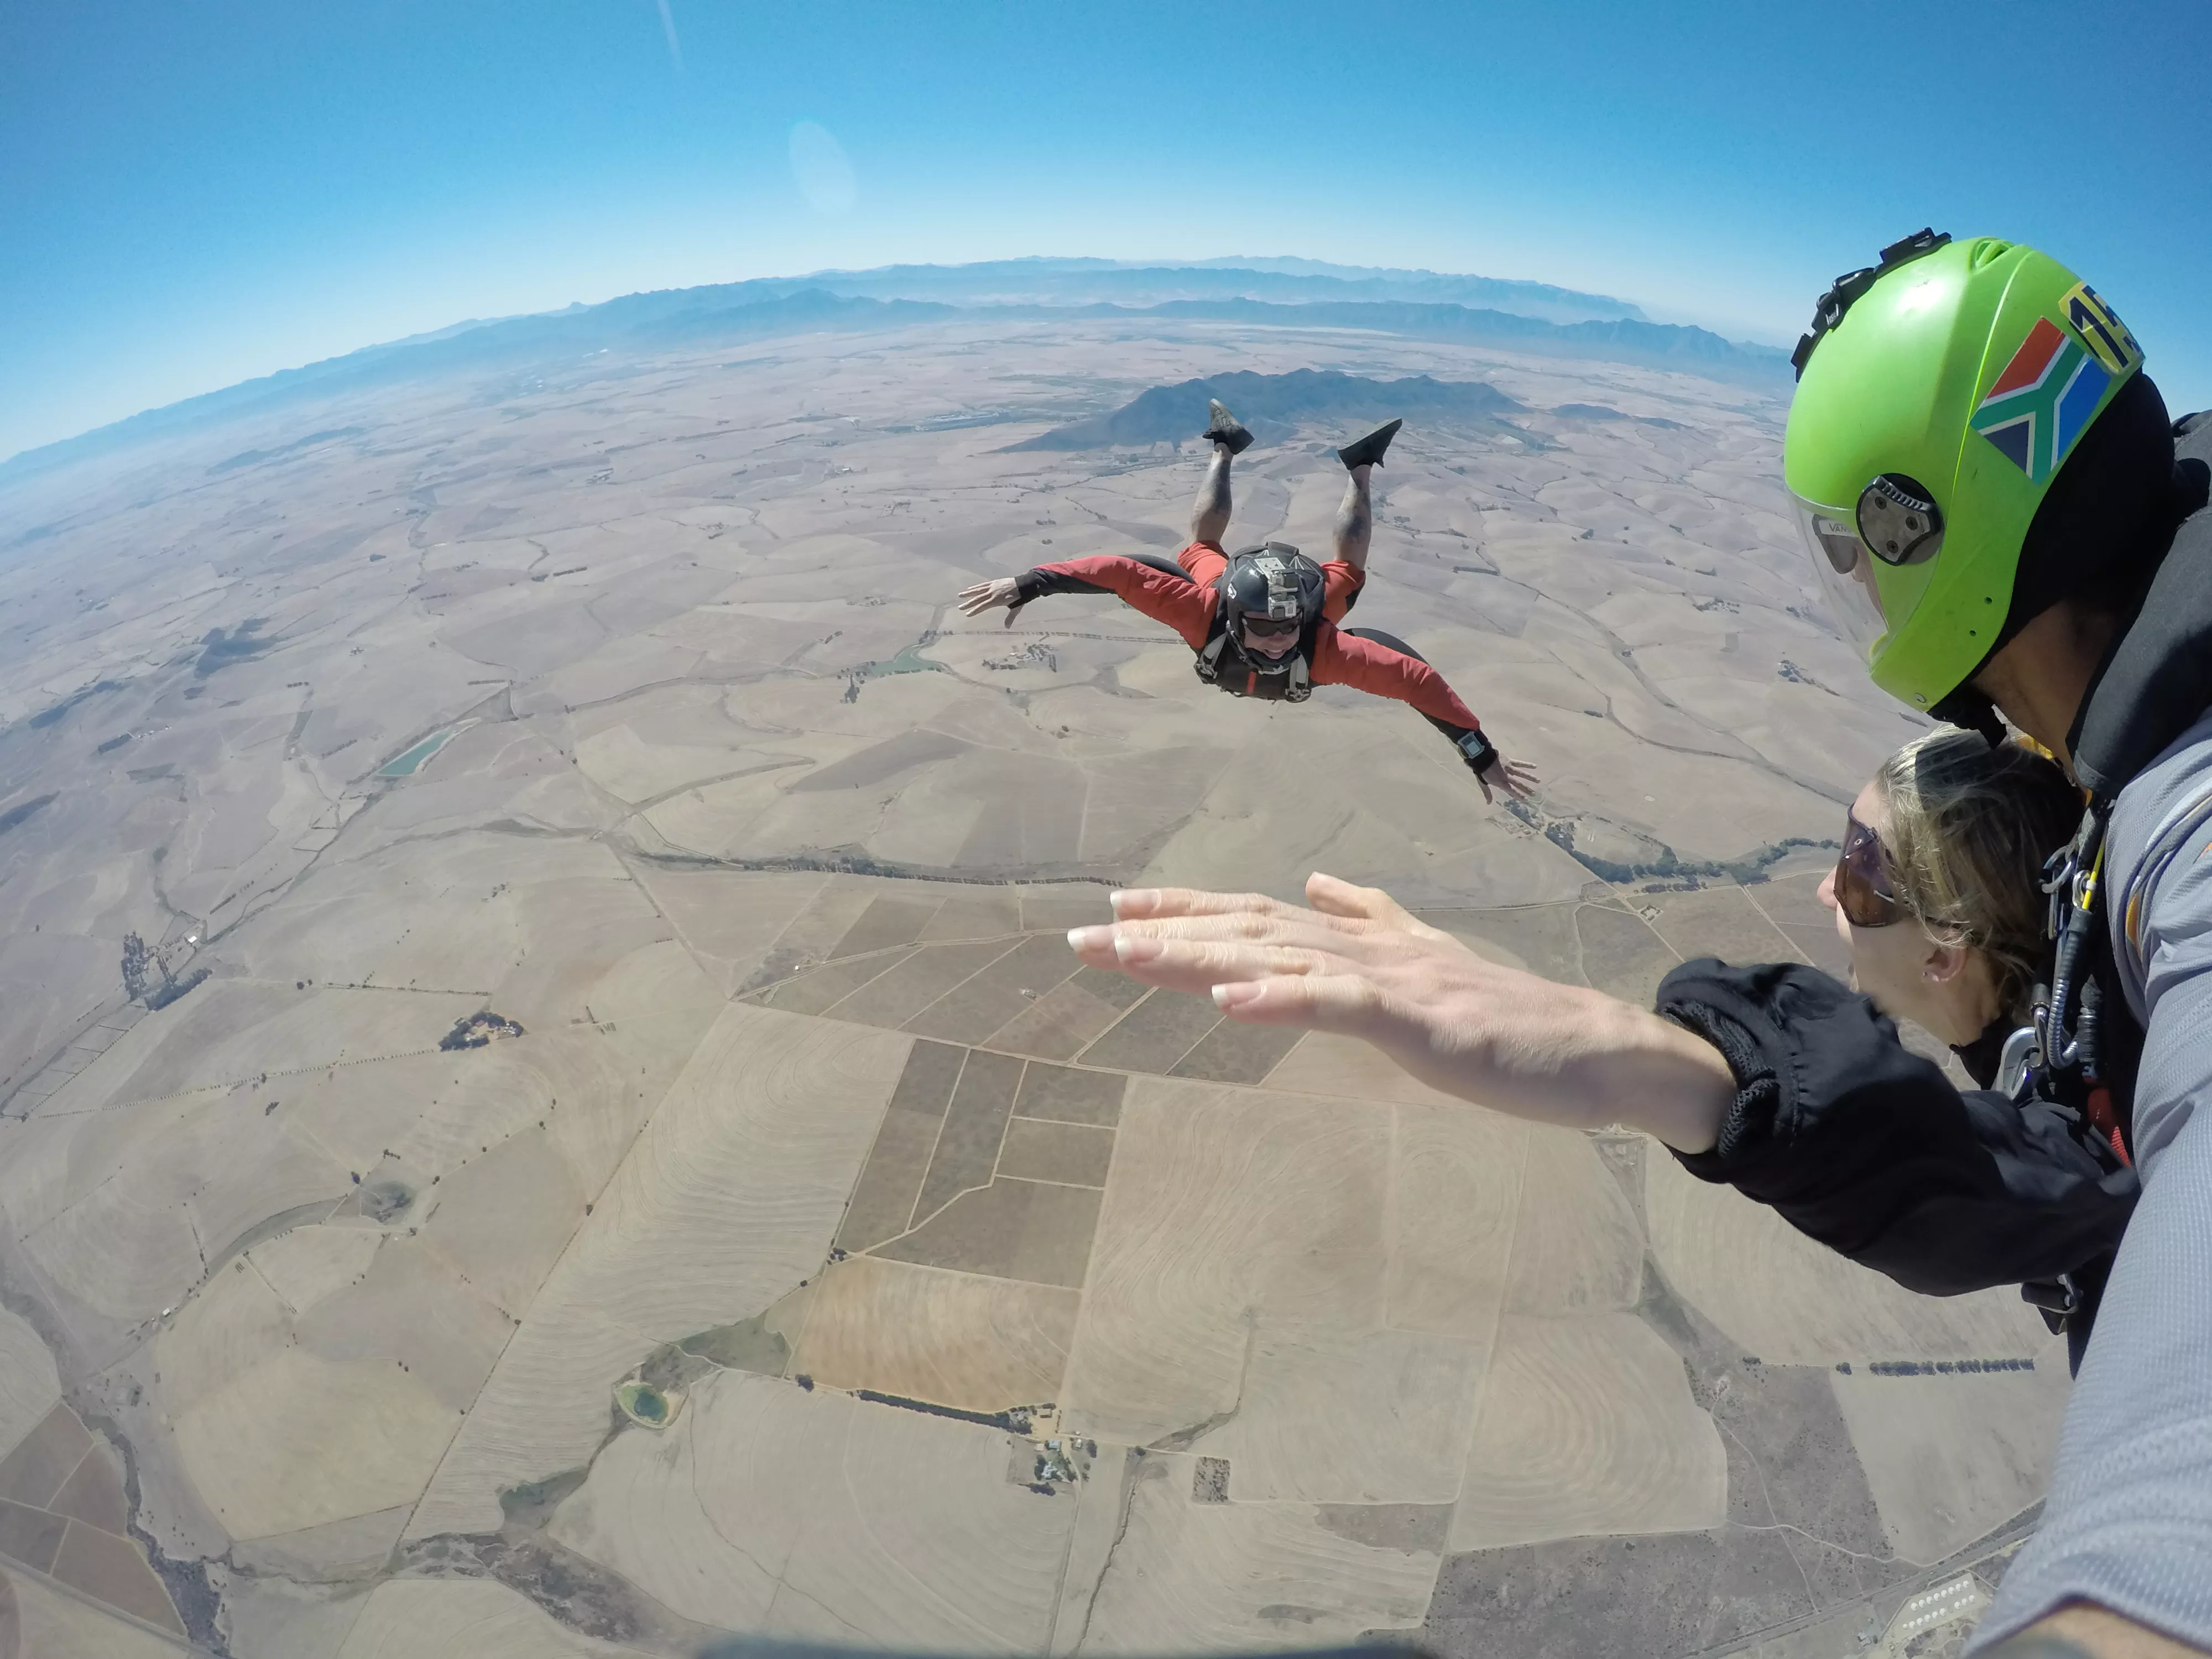 Mother City SkyDiving in South Africa, Africa | Skydiving - Rated 4.2